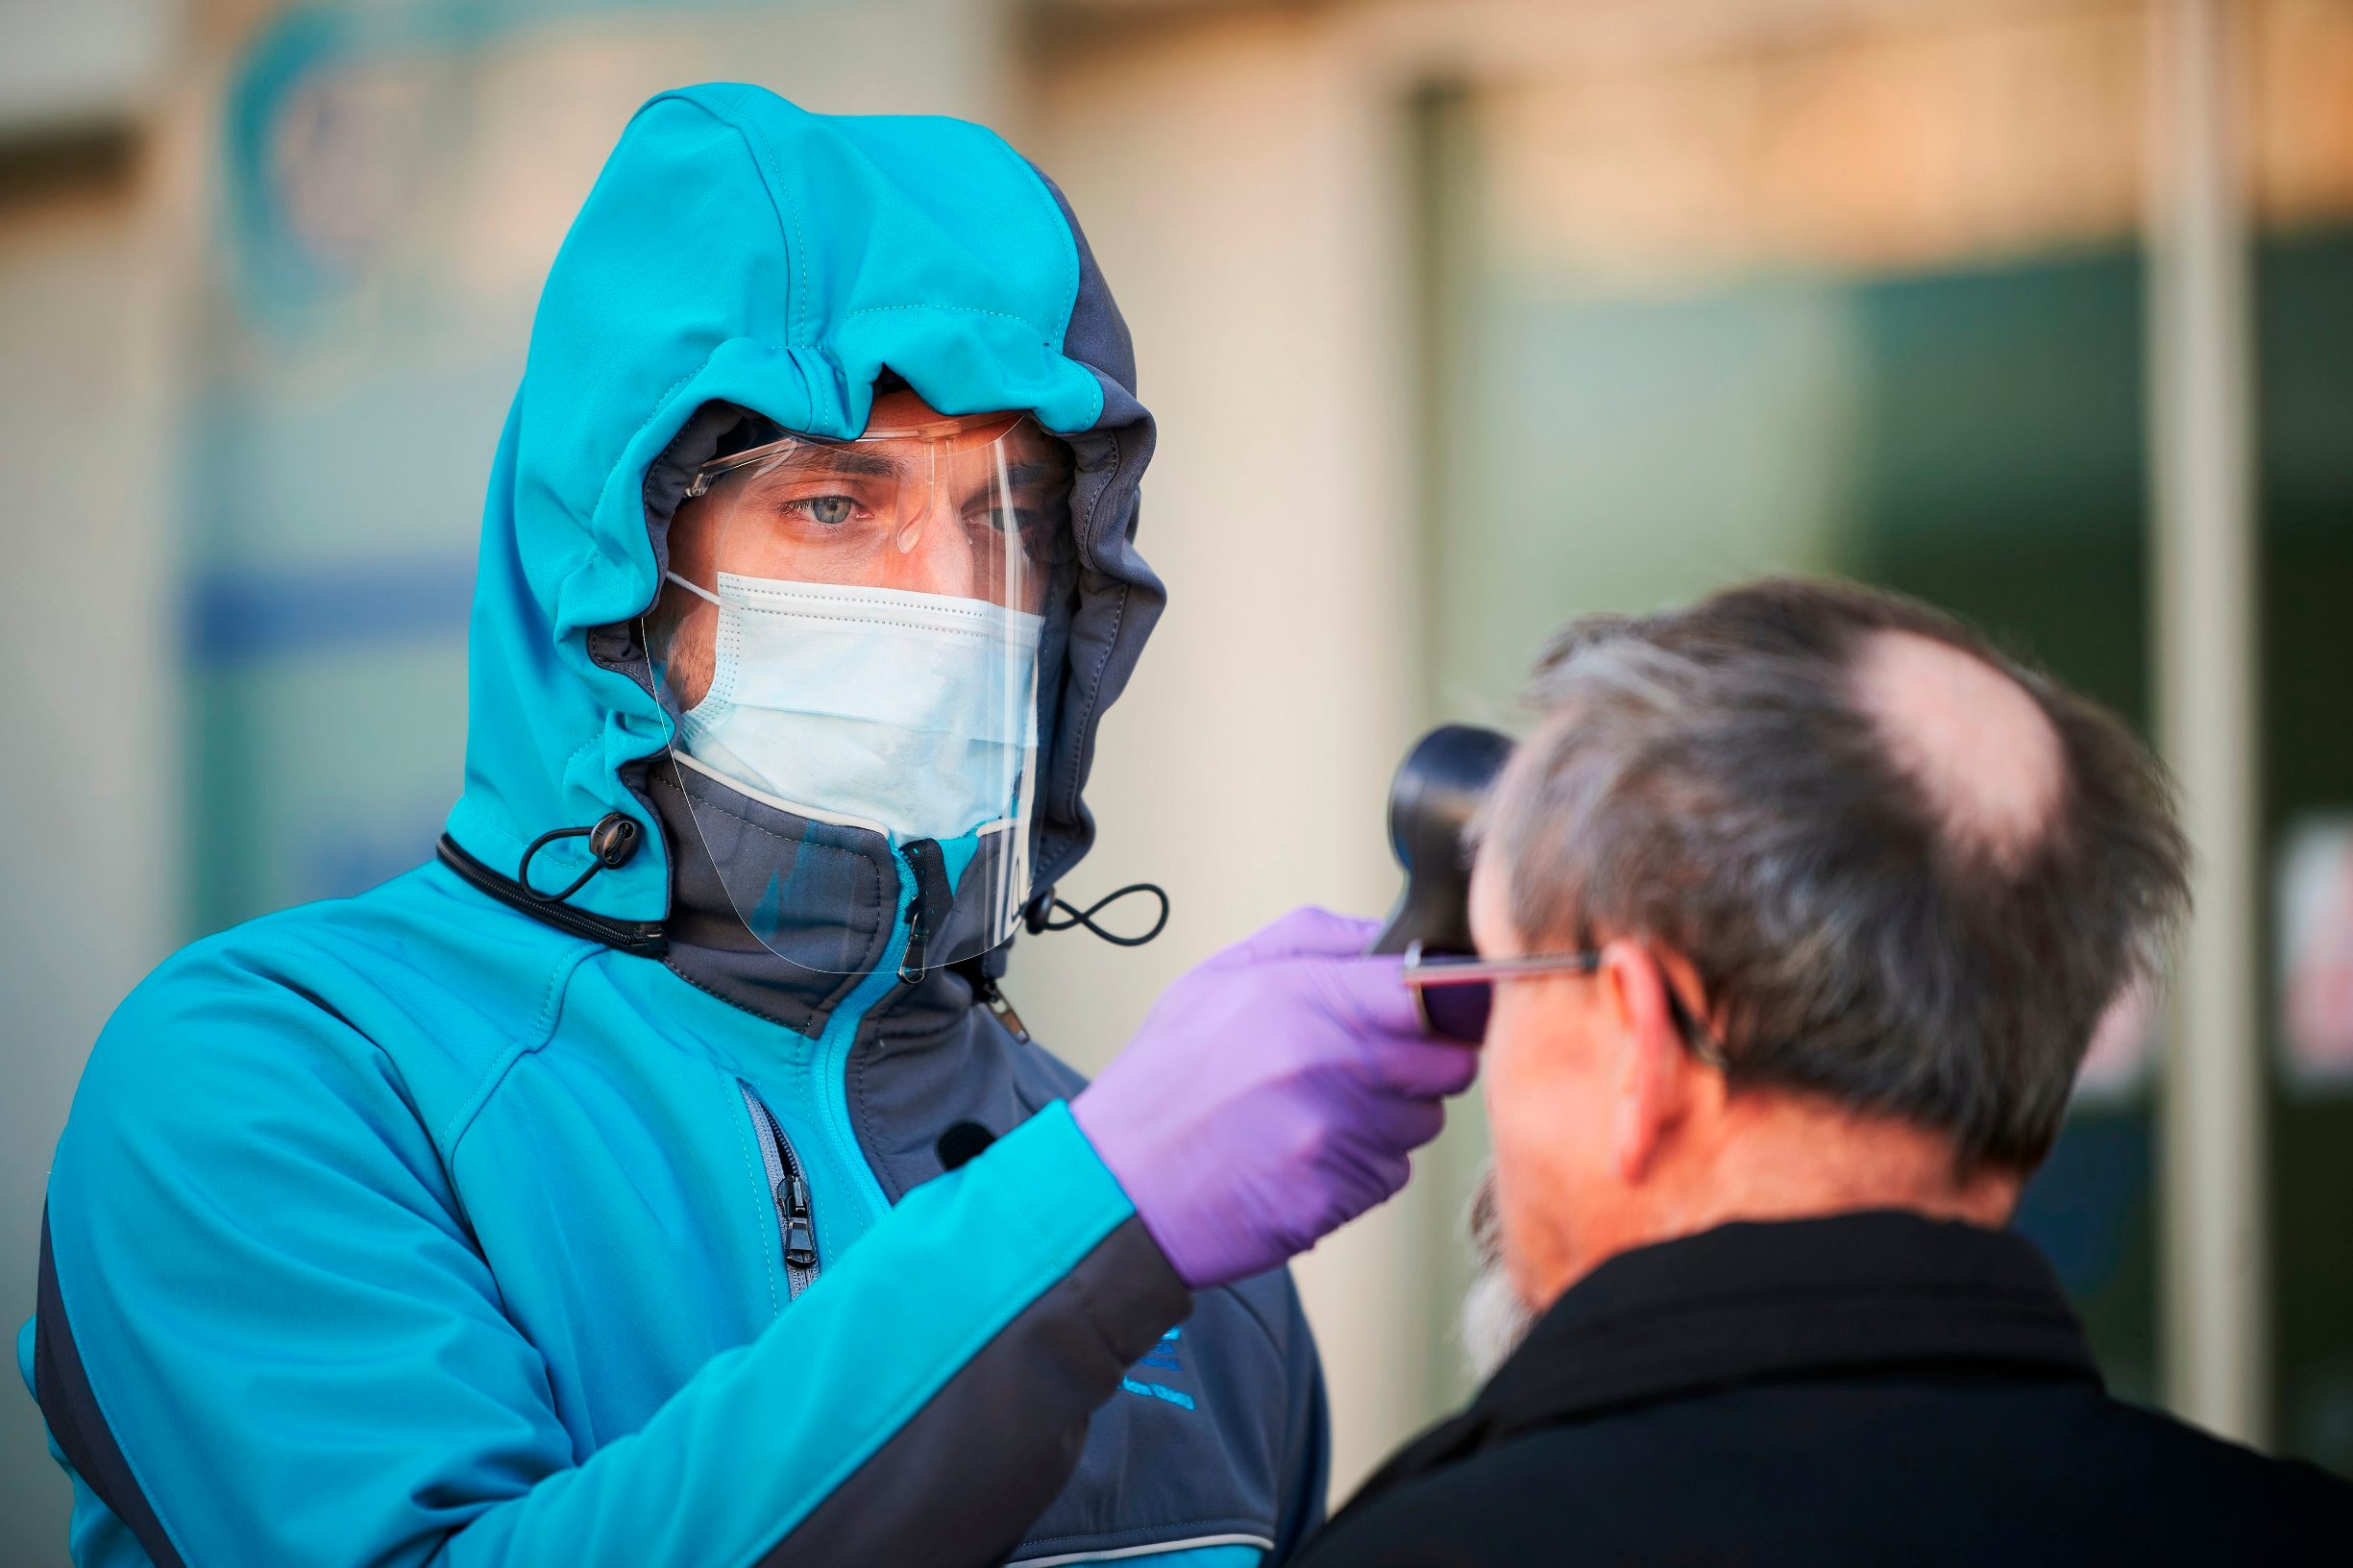 TOPSHOT - A medical worker measures body temperature at one of the entrances of the Community Health Centre in Kranj, Slovenia on March 23, 2020 amid concerns over the spread of the COVID-19 coronavirus. (Photo by Jure Makovec / AFP)